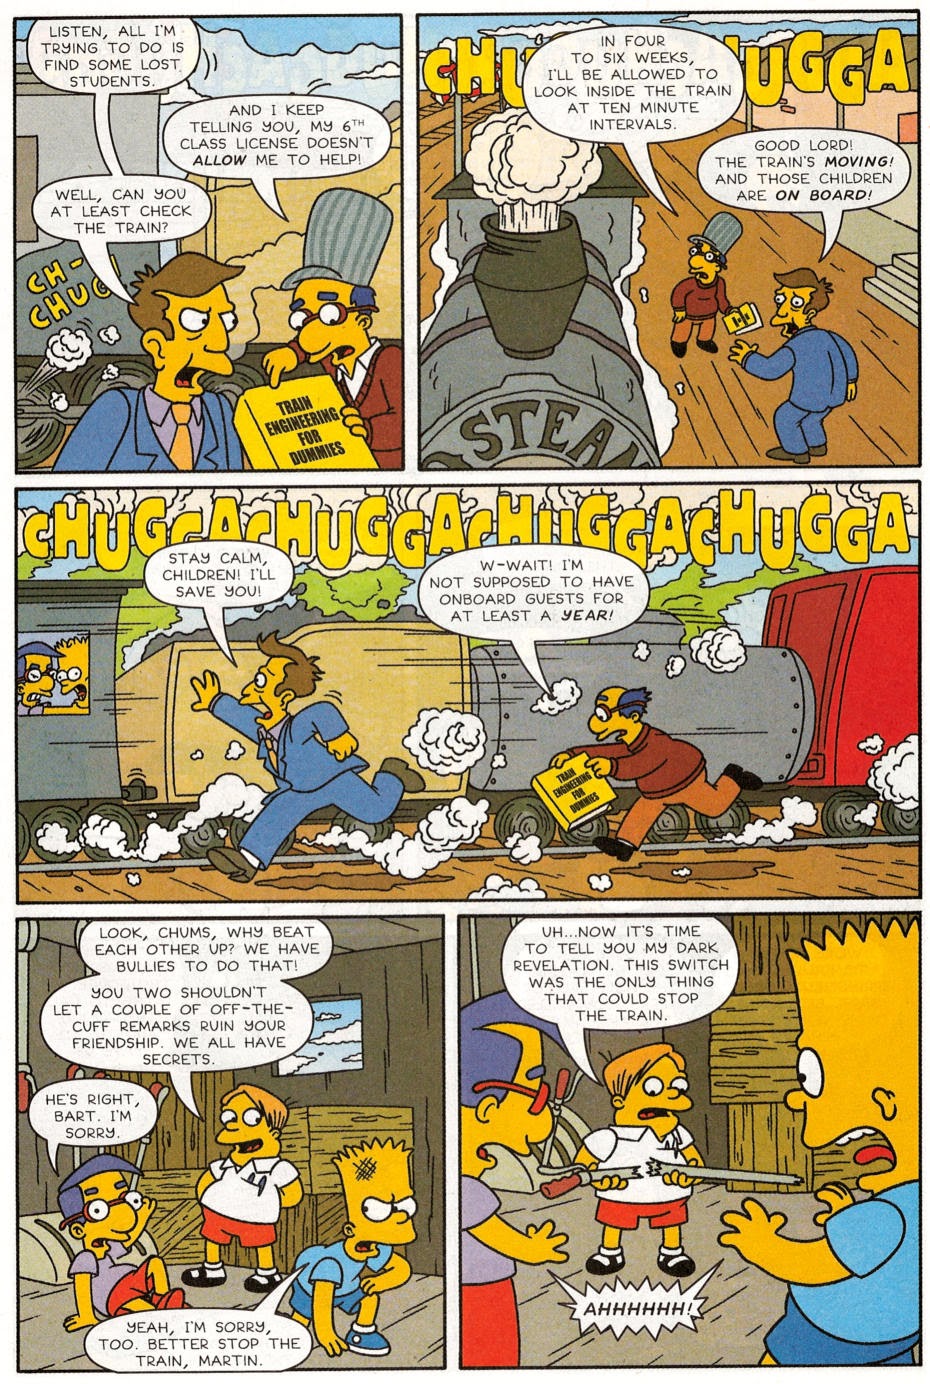 Read online Bart Simpson comic -  Issue #30 - 22